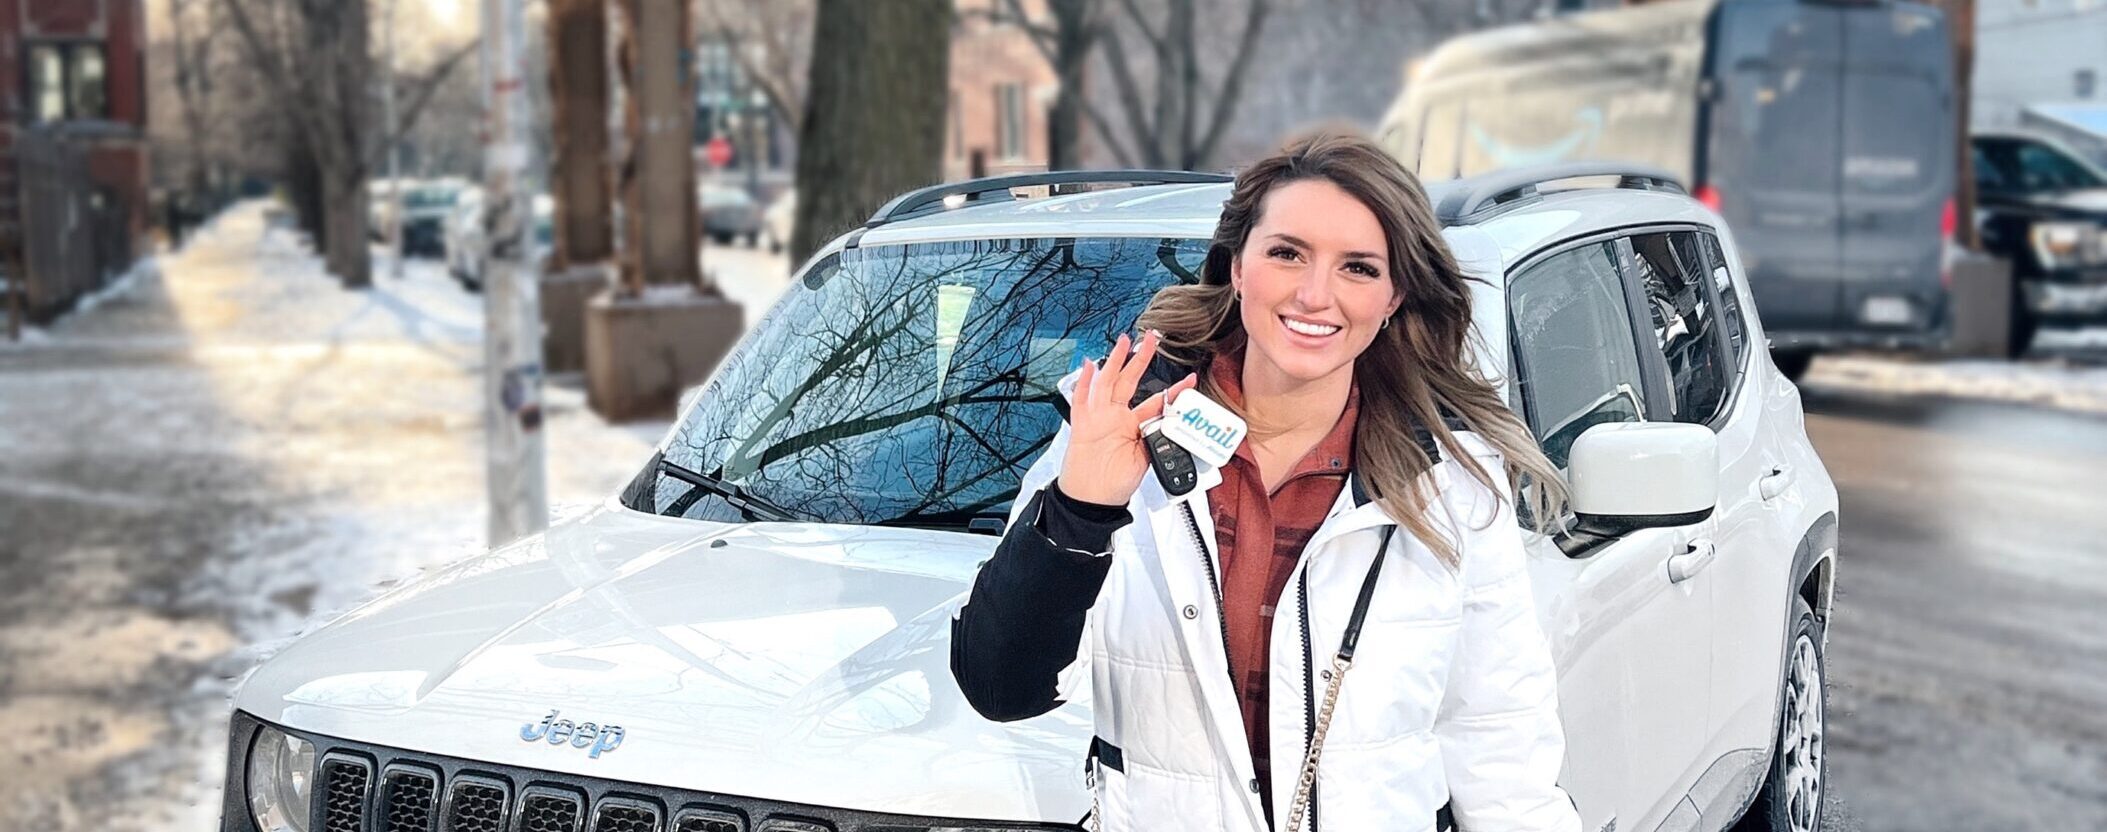 Smiling woman stands in front of a white car and holds a key chain with the Avail car sharing logo.